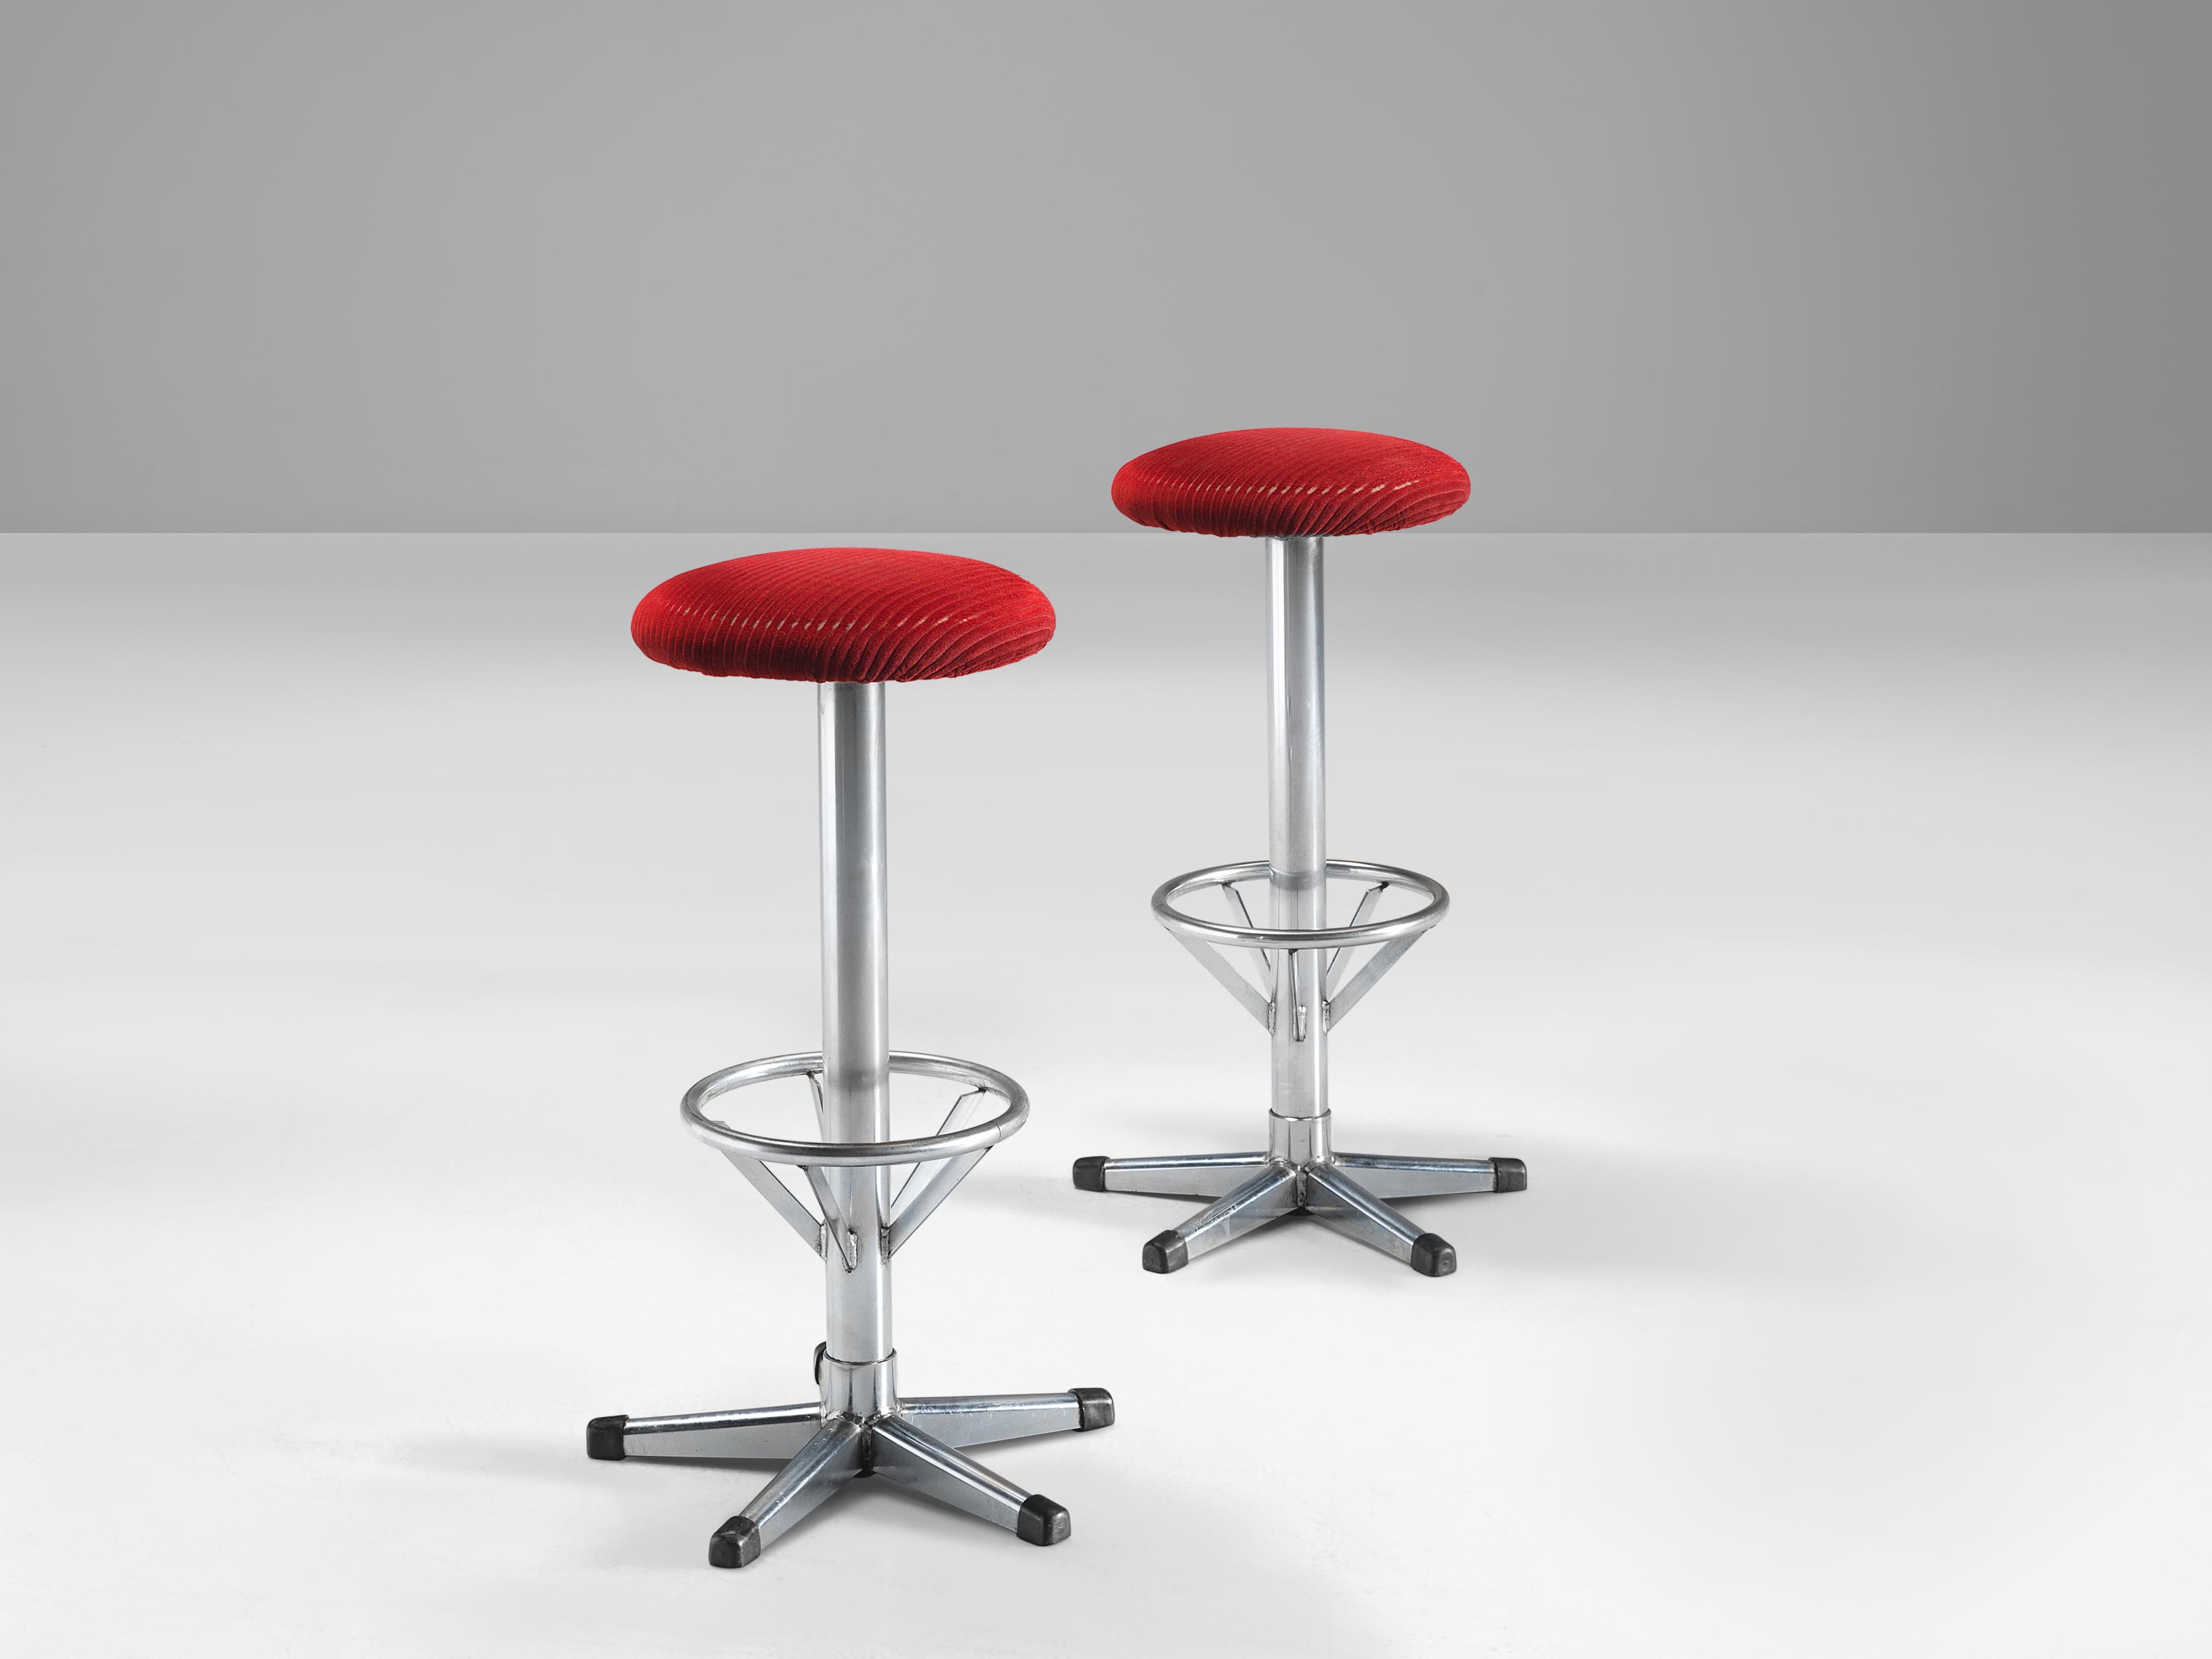 Bar stools, metal, velvet, Europe, 1970s.

Exquisite barstools in red velvet upholstery. Due to the soft seat and back, these chairs provide a very pleasant seating comfort. The five-legged footrest emphasizes the functional design. The circle is